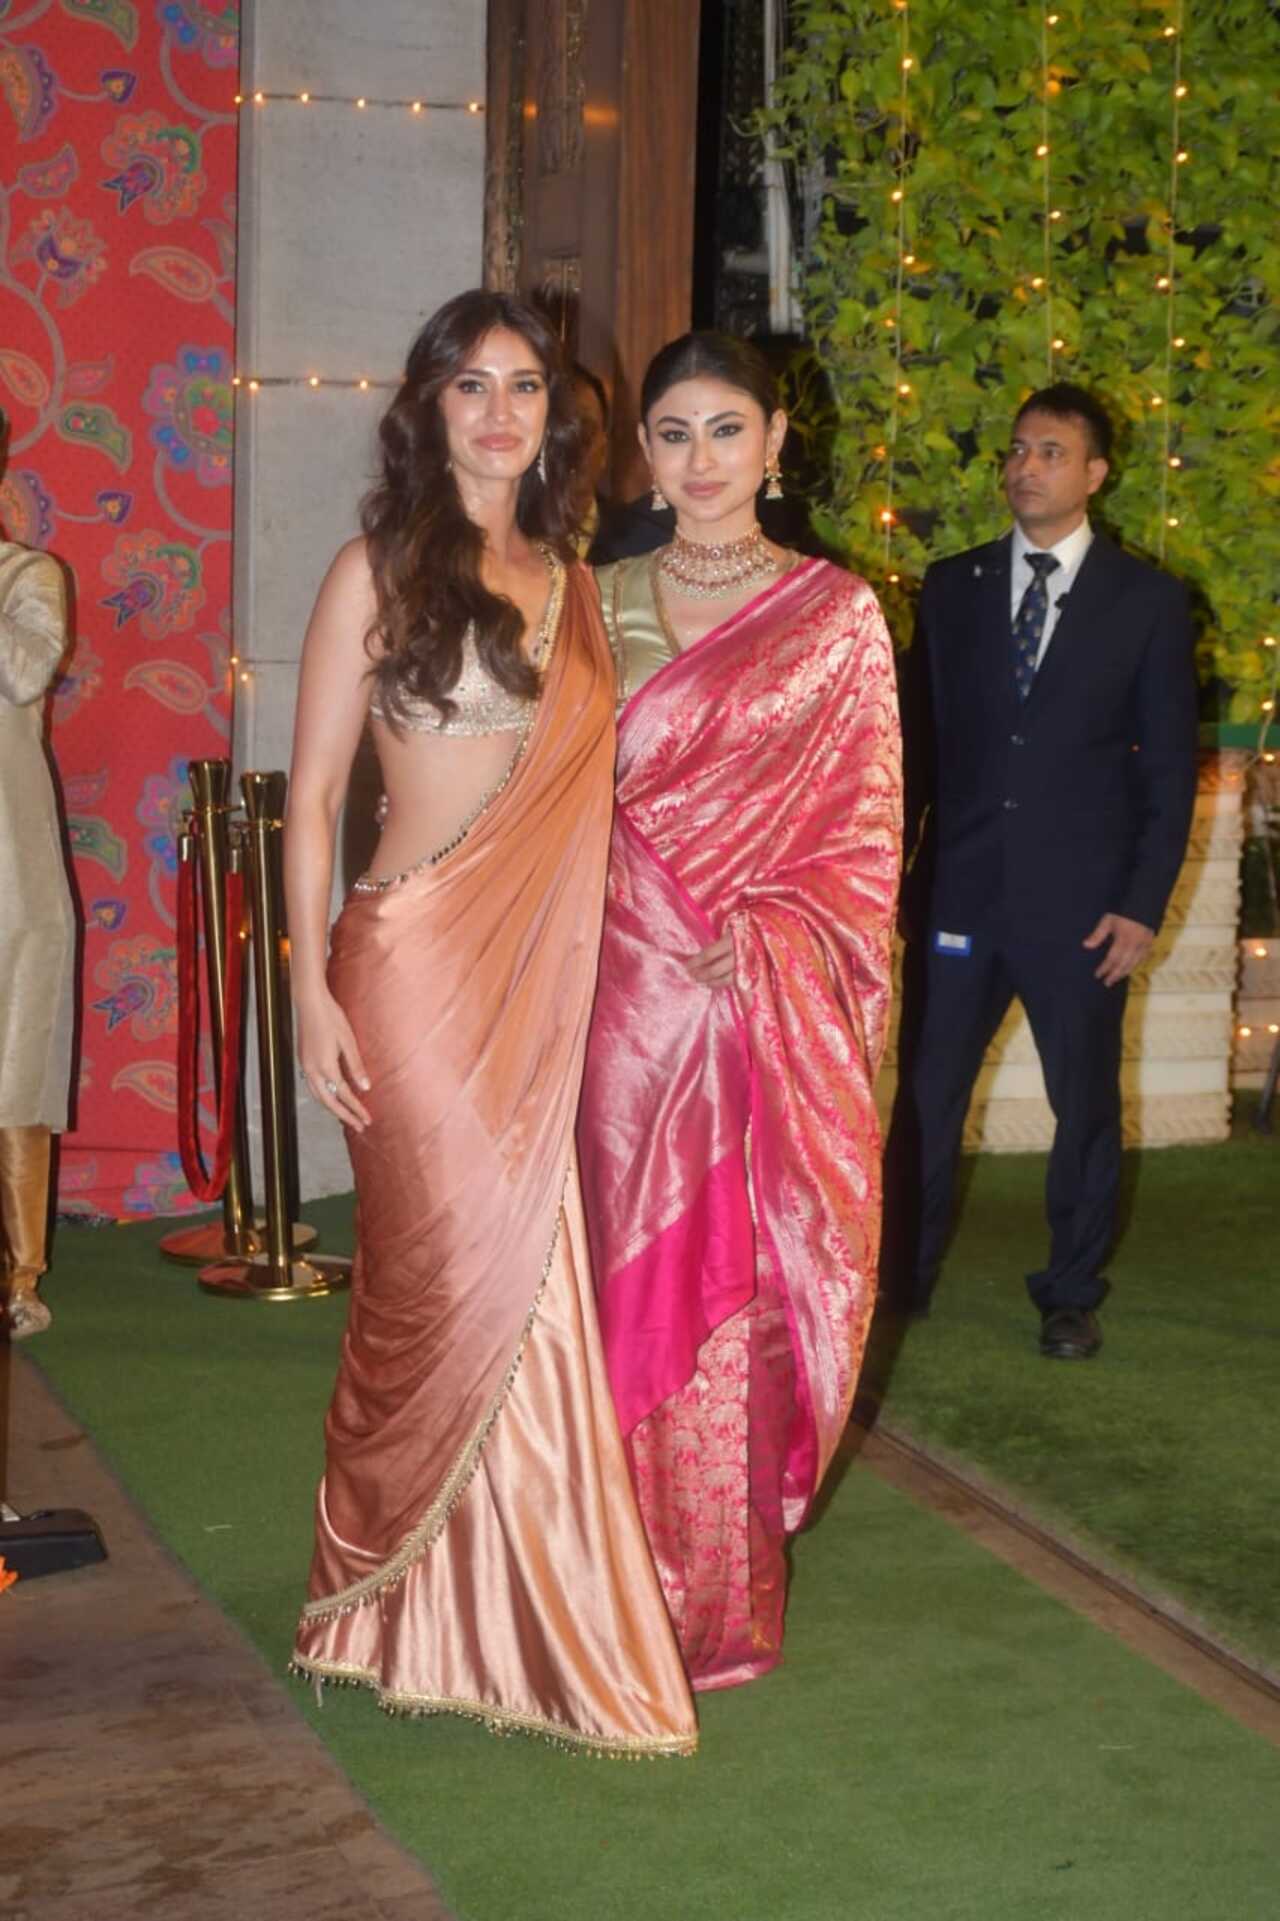 Mouni Roy and her friend Disha Patani posed for pictures together at the Ganesh Puja